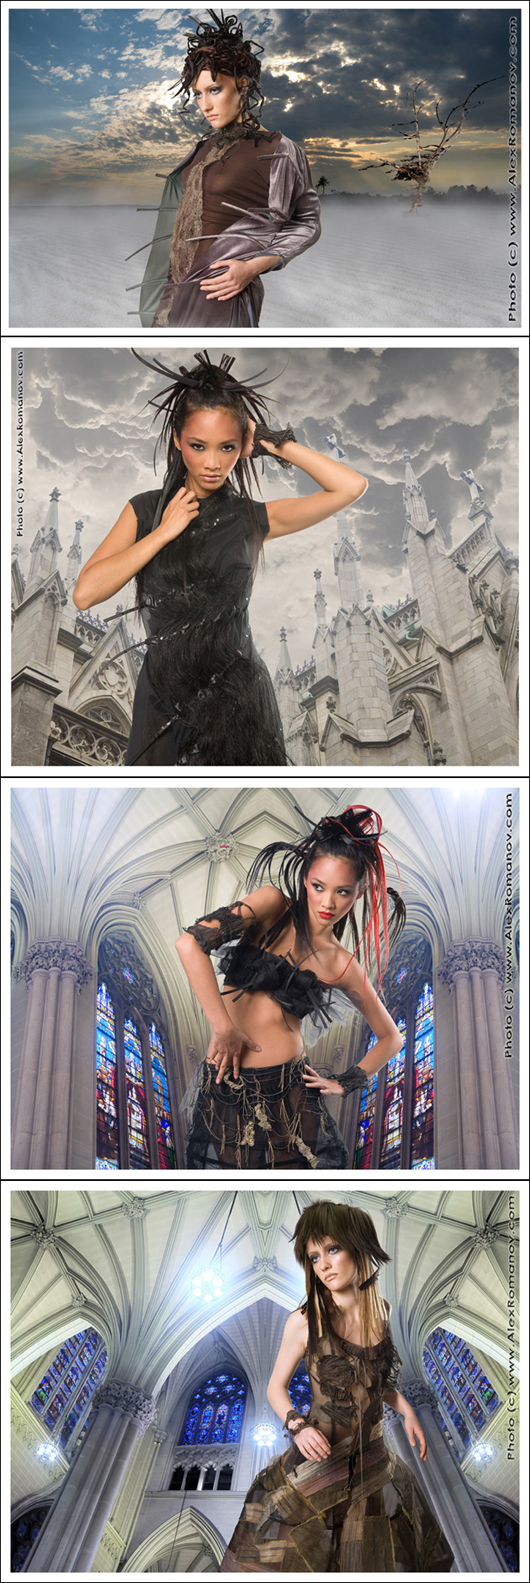 Male and Female model photo shoot of Alex Romanov, Su zie and Liiratai in NYC-Saint Patrick's Cathedral, hair styled by Irina Cher, makeup by Jordana David